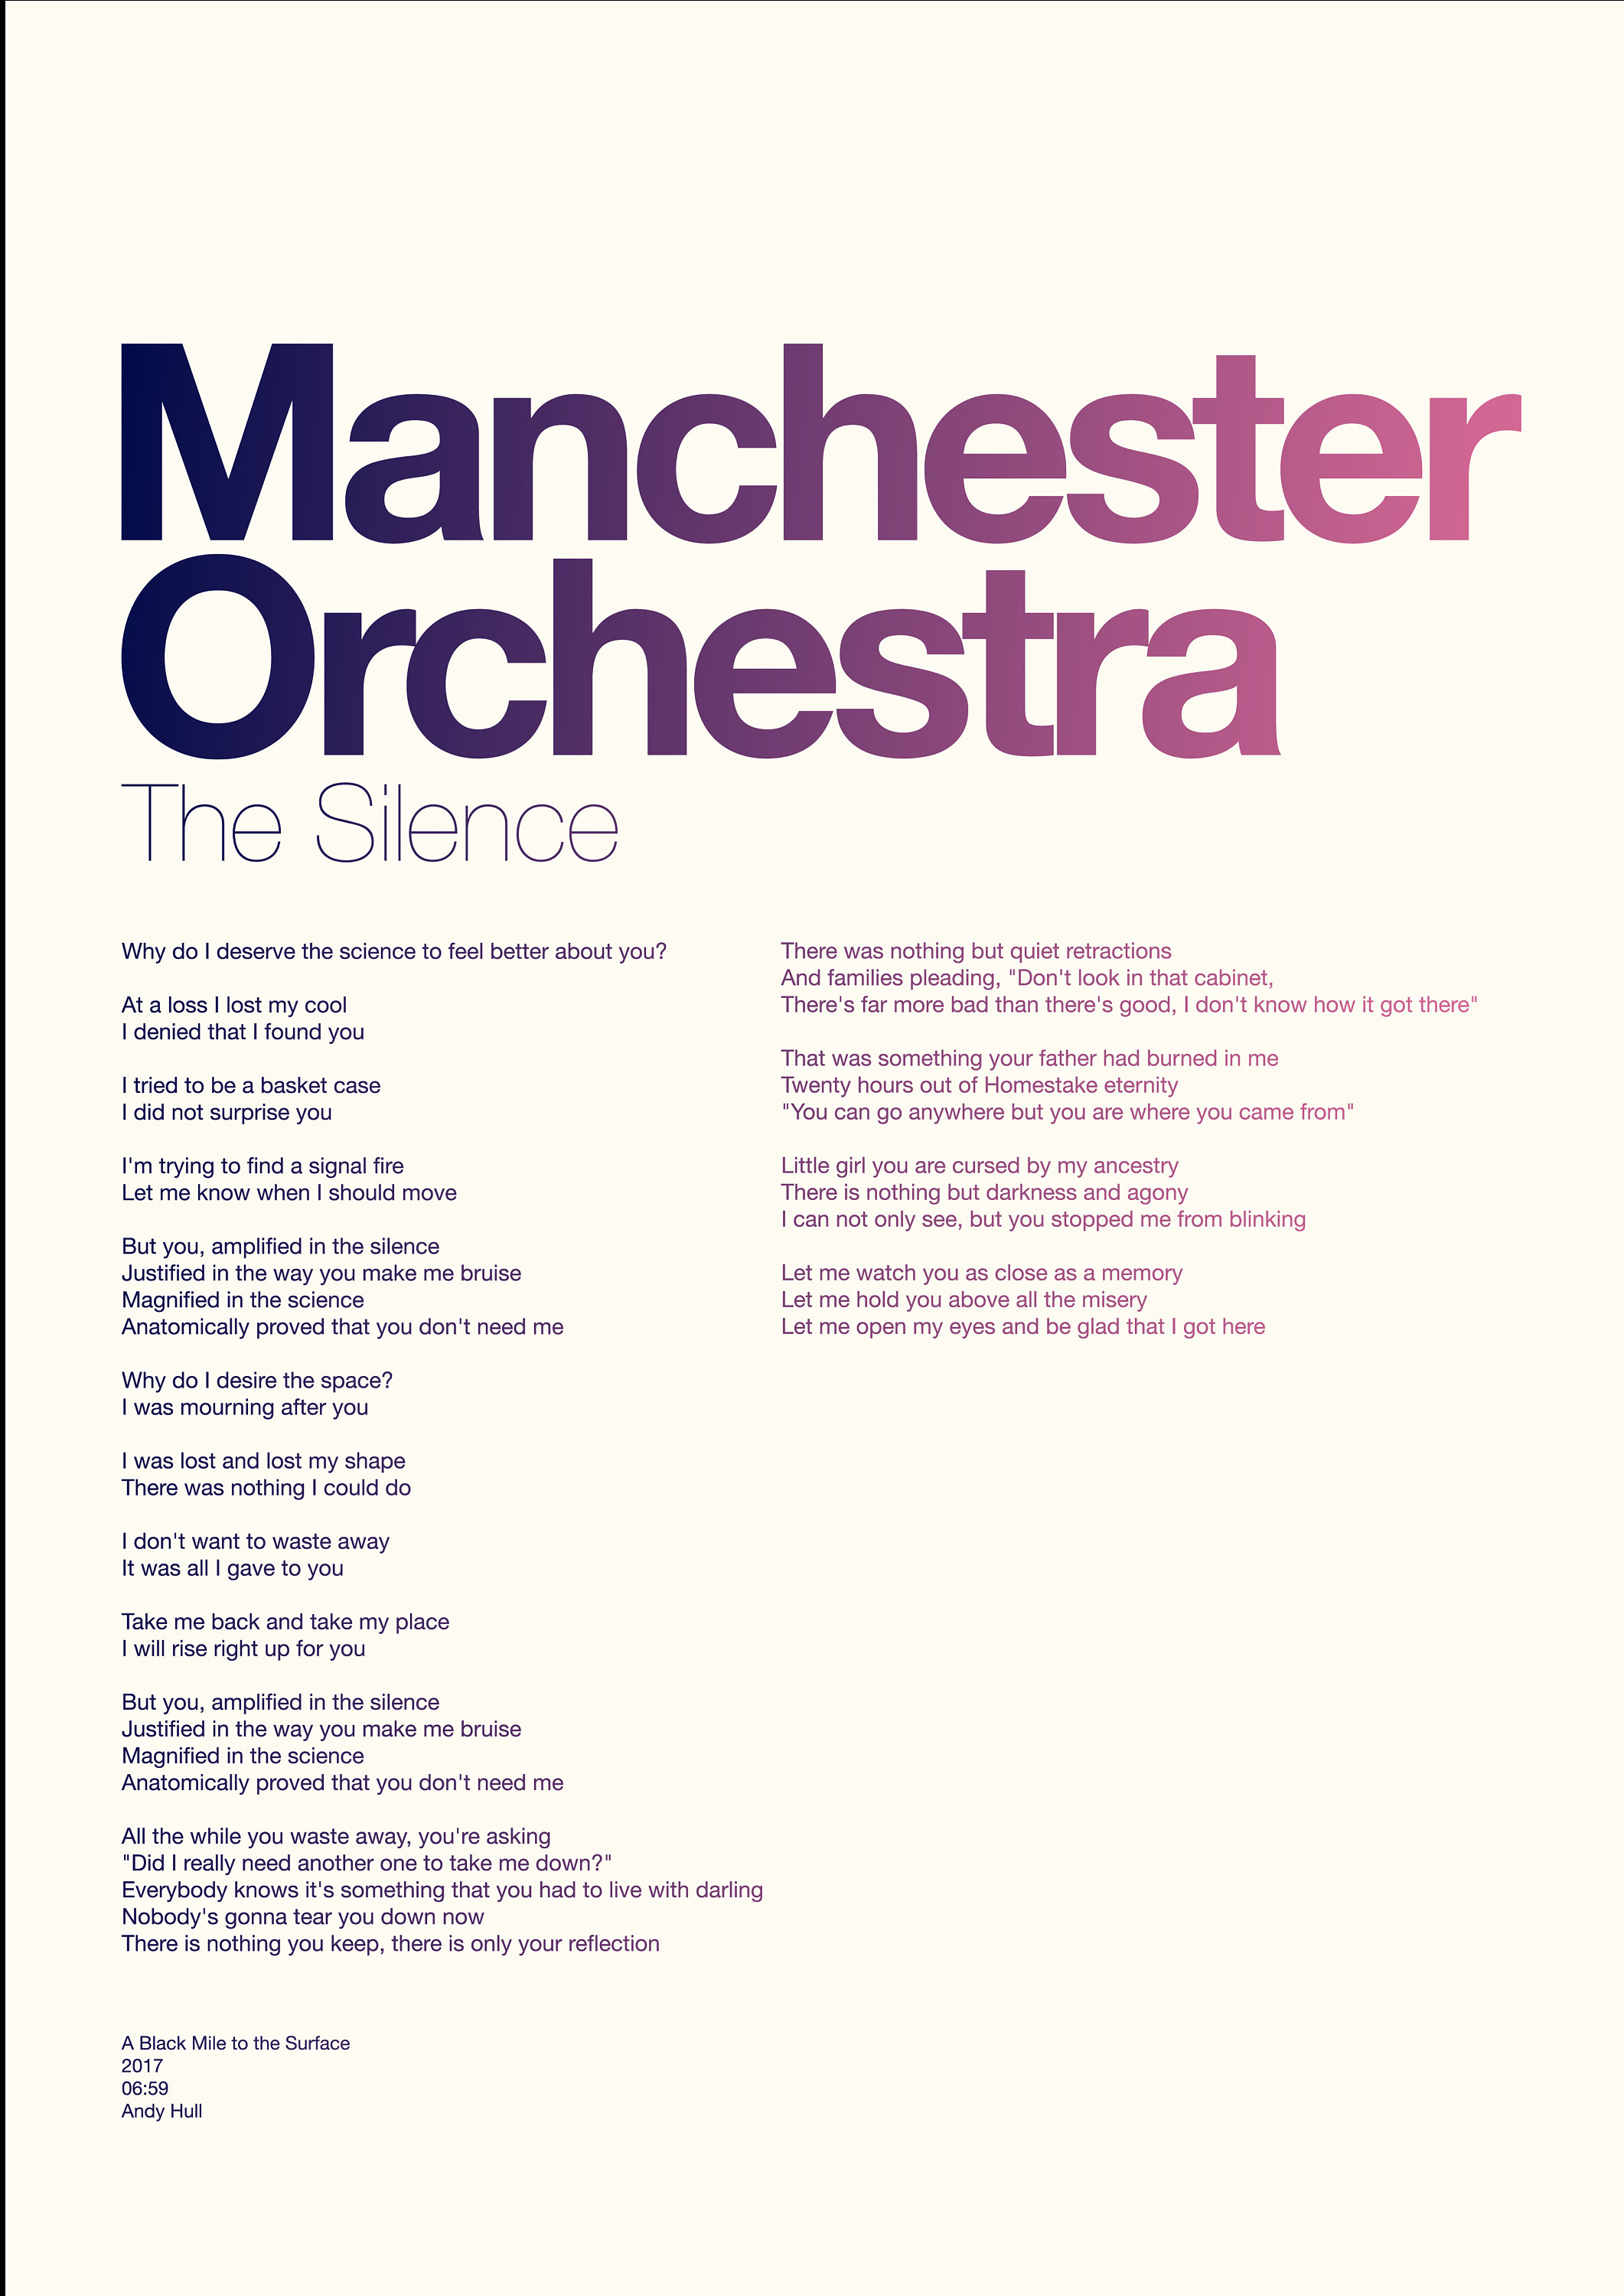 A Black Mile To The Surface Music Poster Promo Manchester Orchestra 